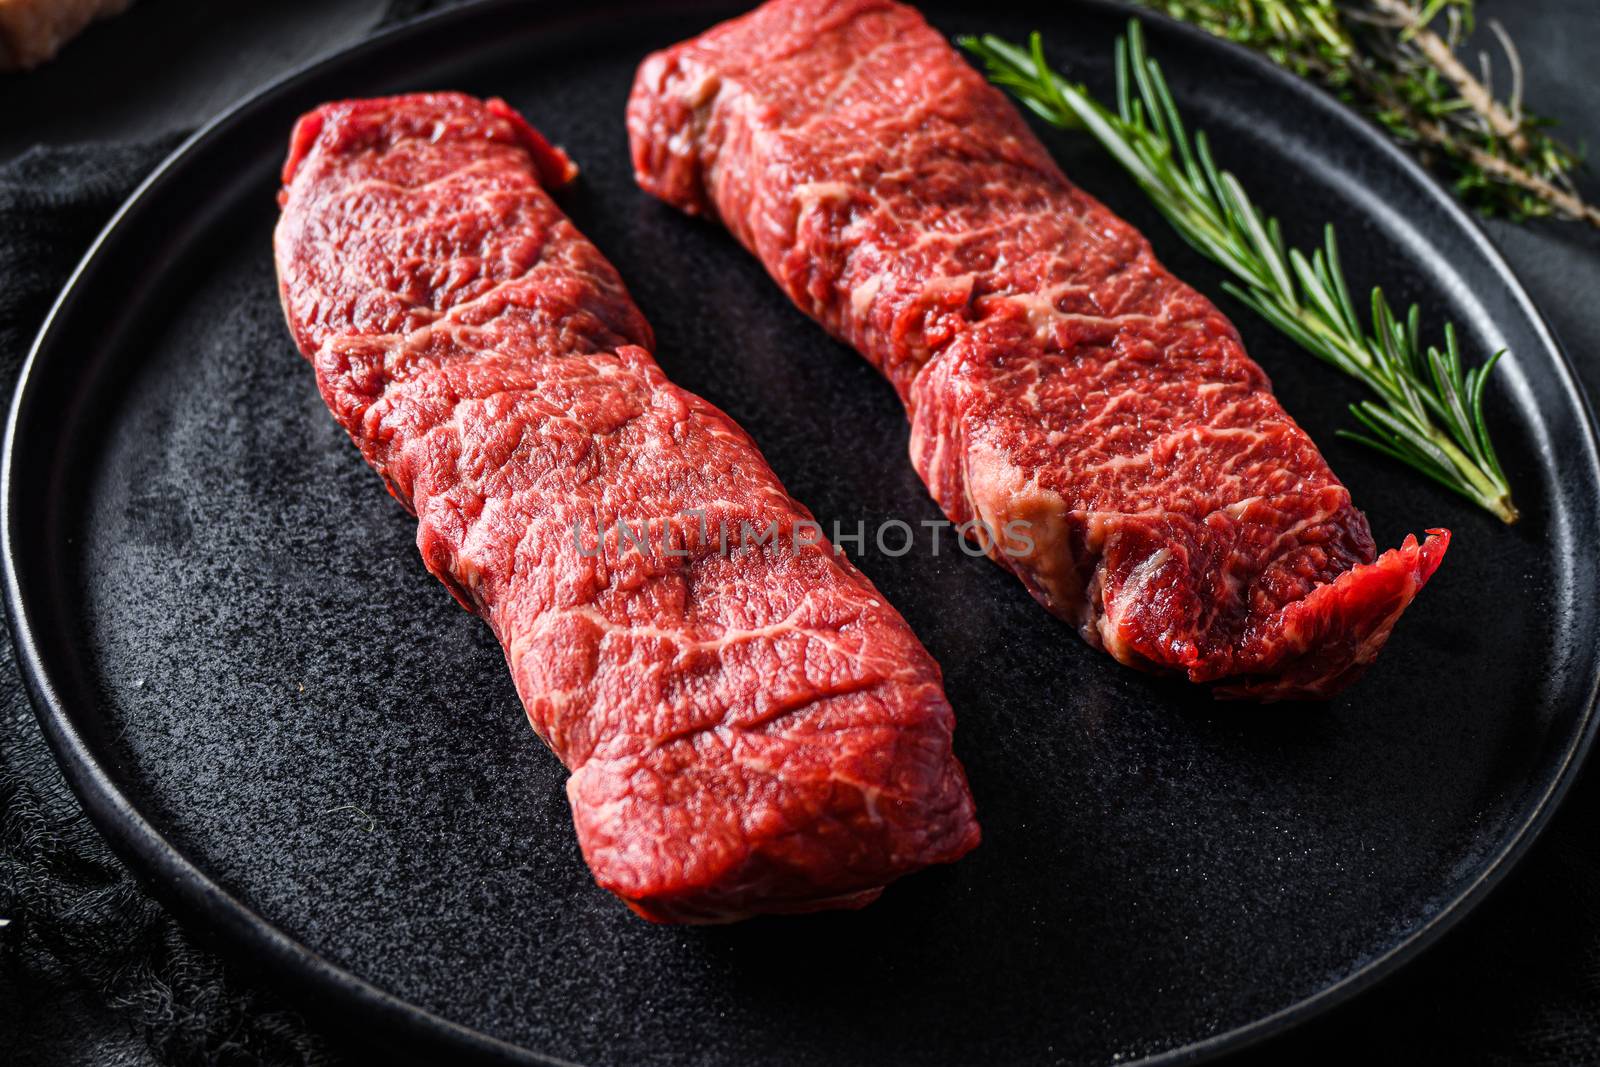 Raw denver cut black angus organic steak on a black plate and stone slate with seasonings, herbs grey concrete background. Side view close up selective focus new wide angle . by Ilianesolenyi